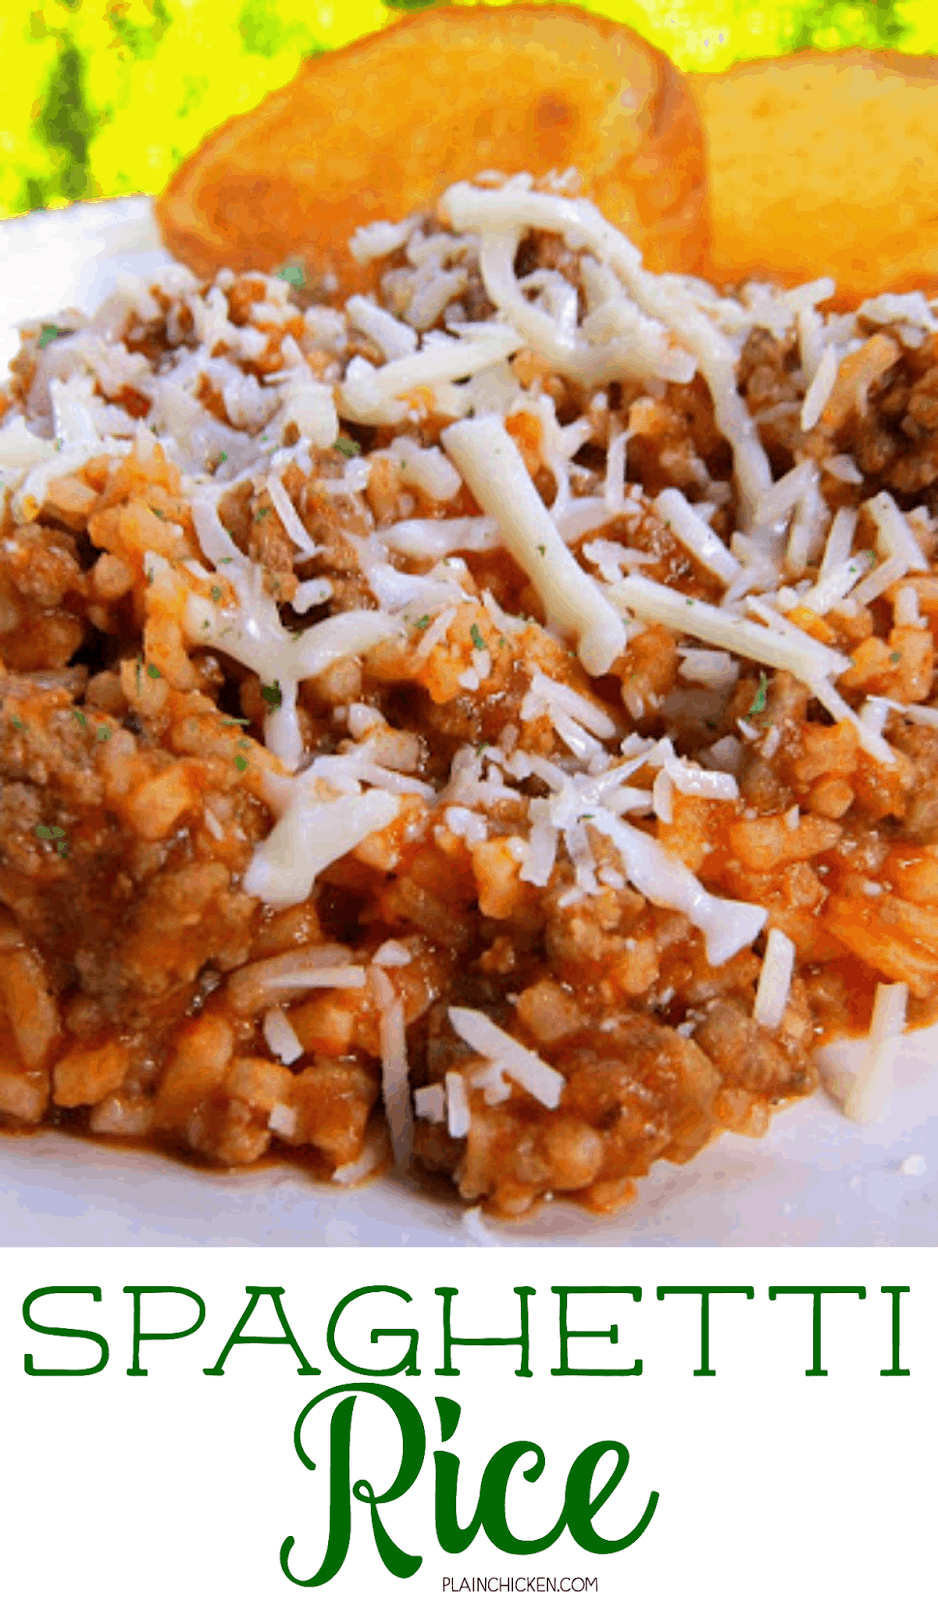 Spaghetti Rice Recipe - homemade meat sauce tossed with rice instead of pasta. Italian sausage or hamburger, tomato sauce, garlic, onions, Italian spices and rice. Ready in about 15 minutes and naturally gluten free! We LOVED this!!